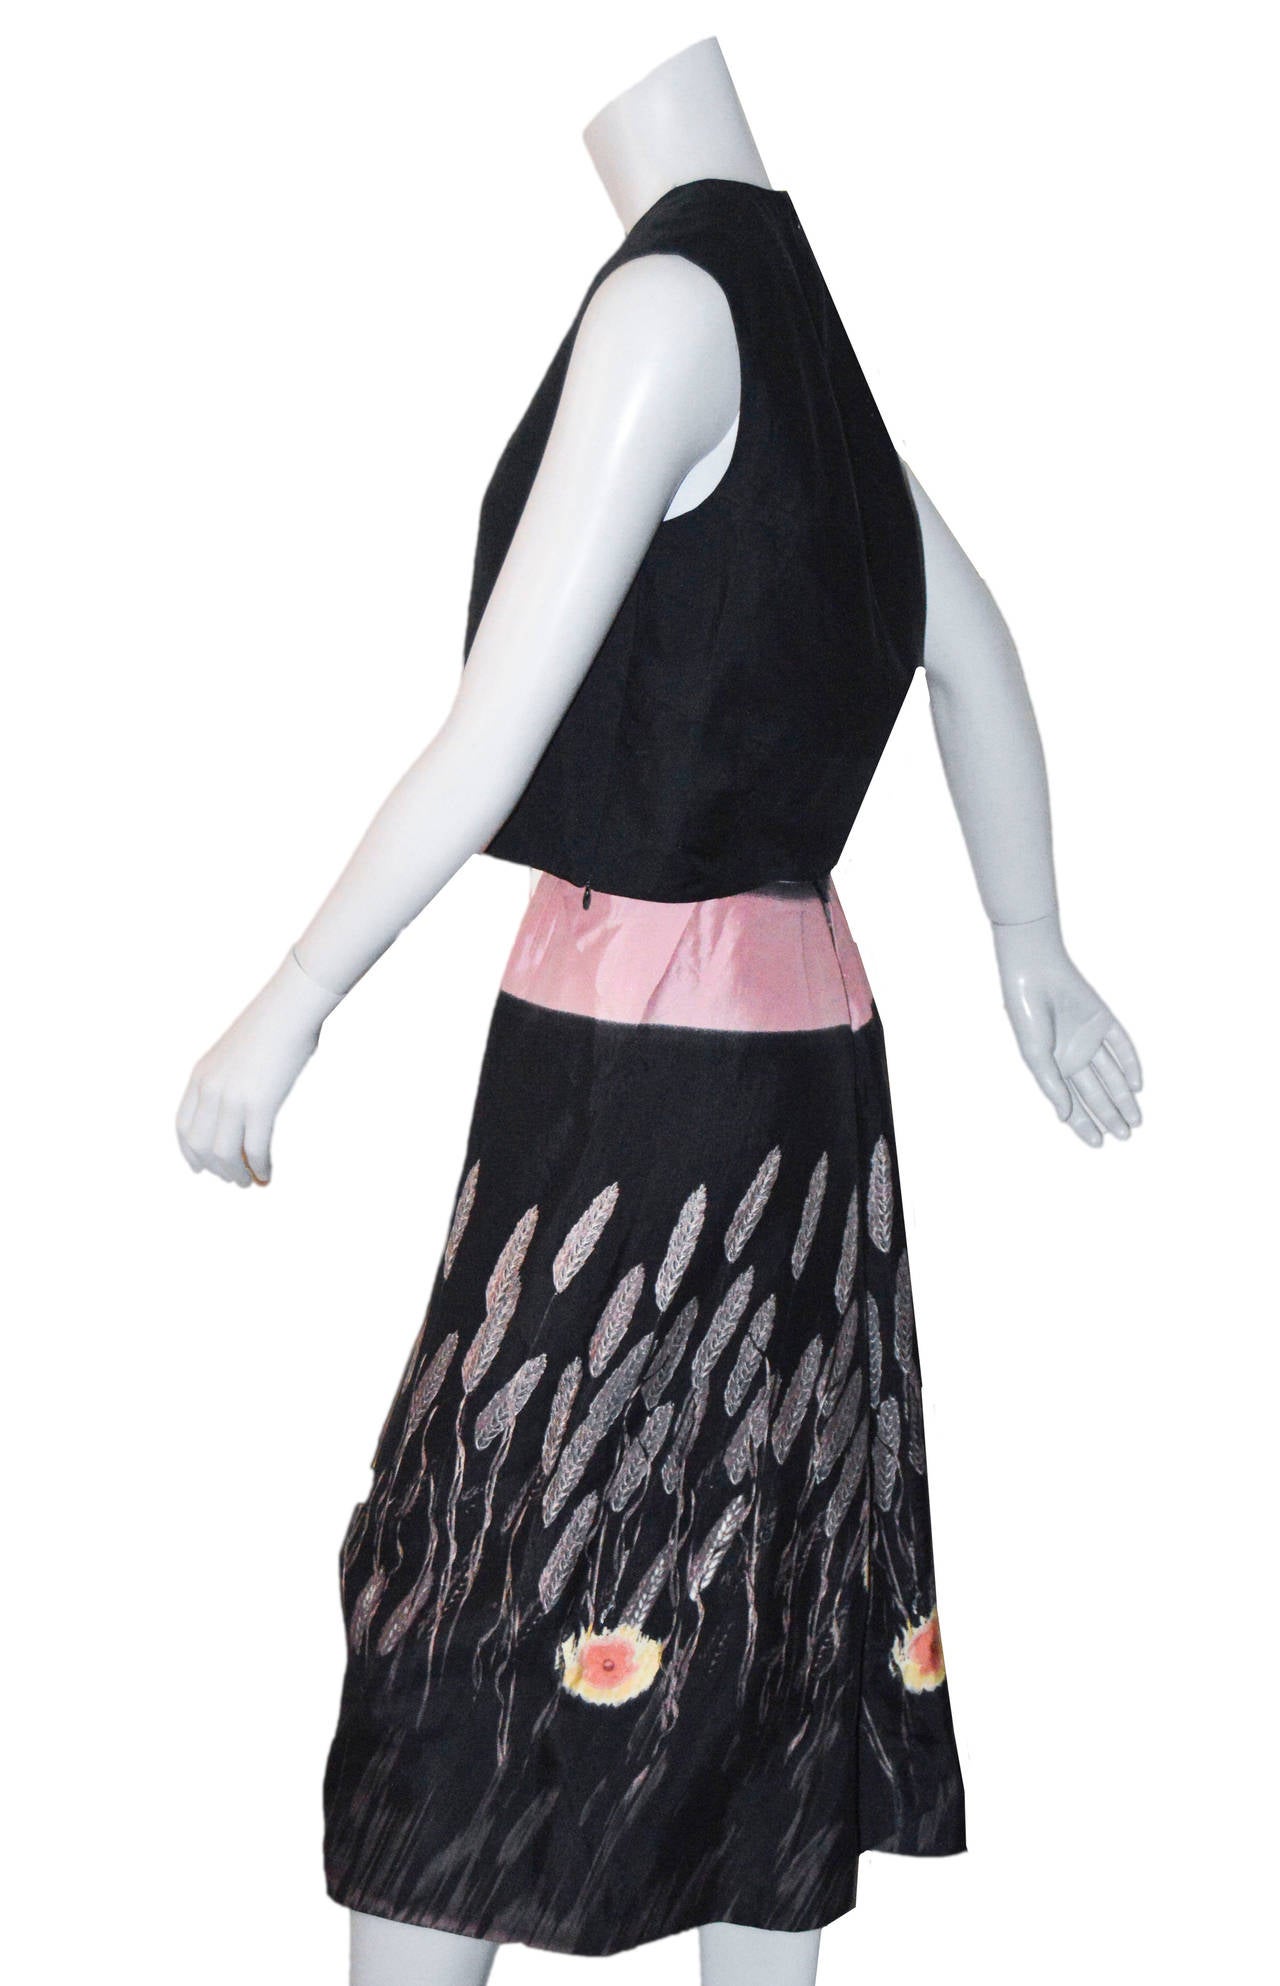 Elegant Miuccia Prada two piece ensemble.
Simple black sleeveless top with printed A-line skirt.
The top features darting and back zipper.
Wide pale pink waist band with cattail and floral print.
Pintucked pleats detailing on hip.
Snap